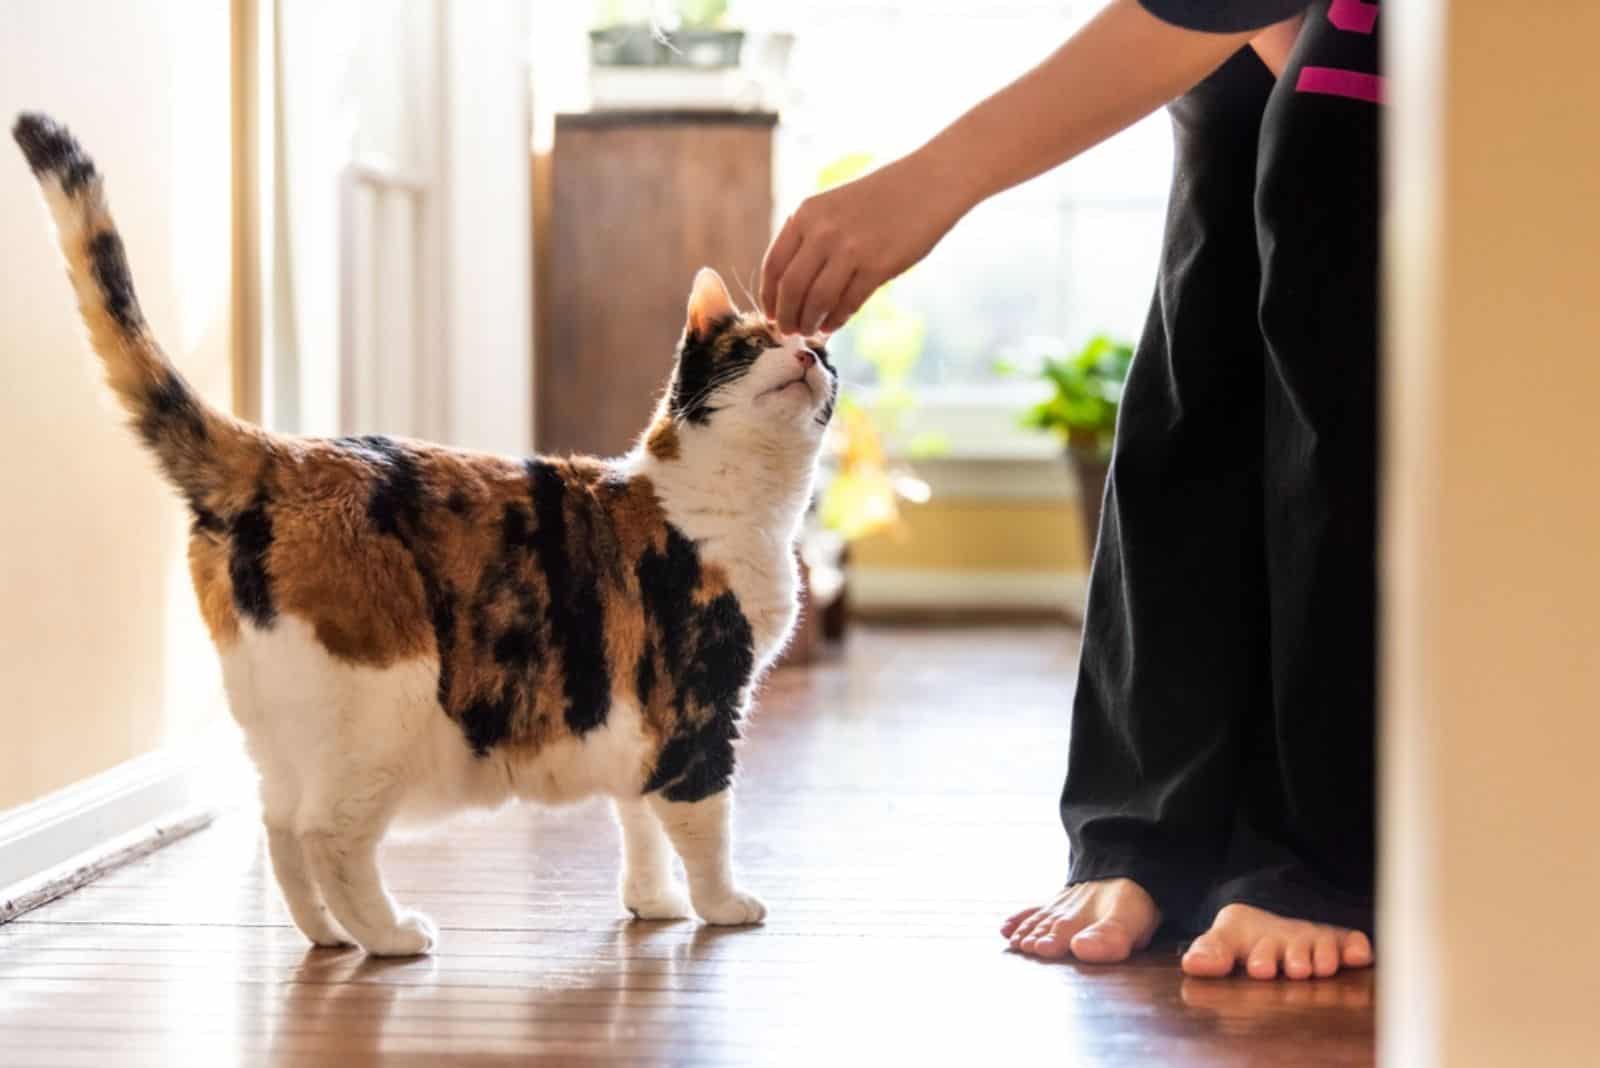 the woman gives a treat to the cat